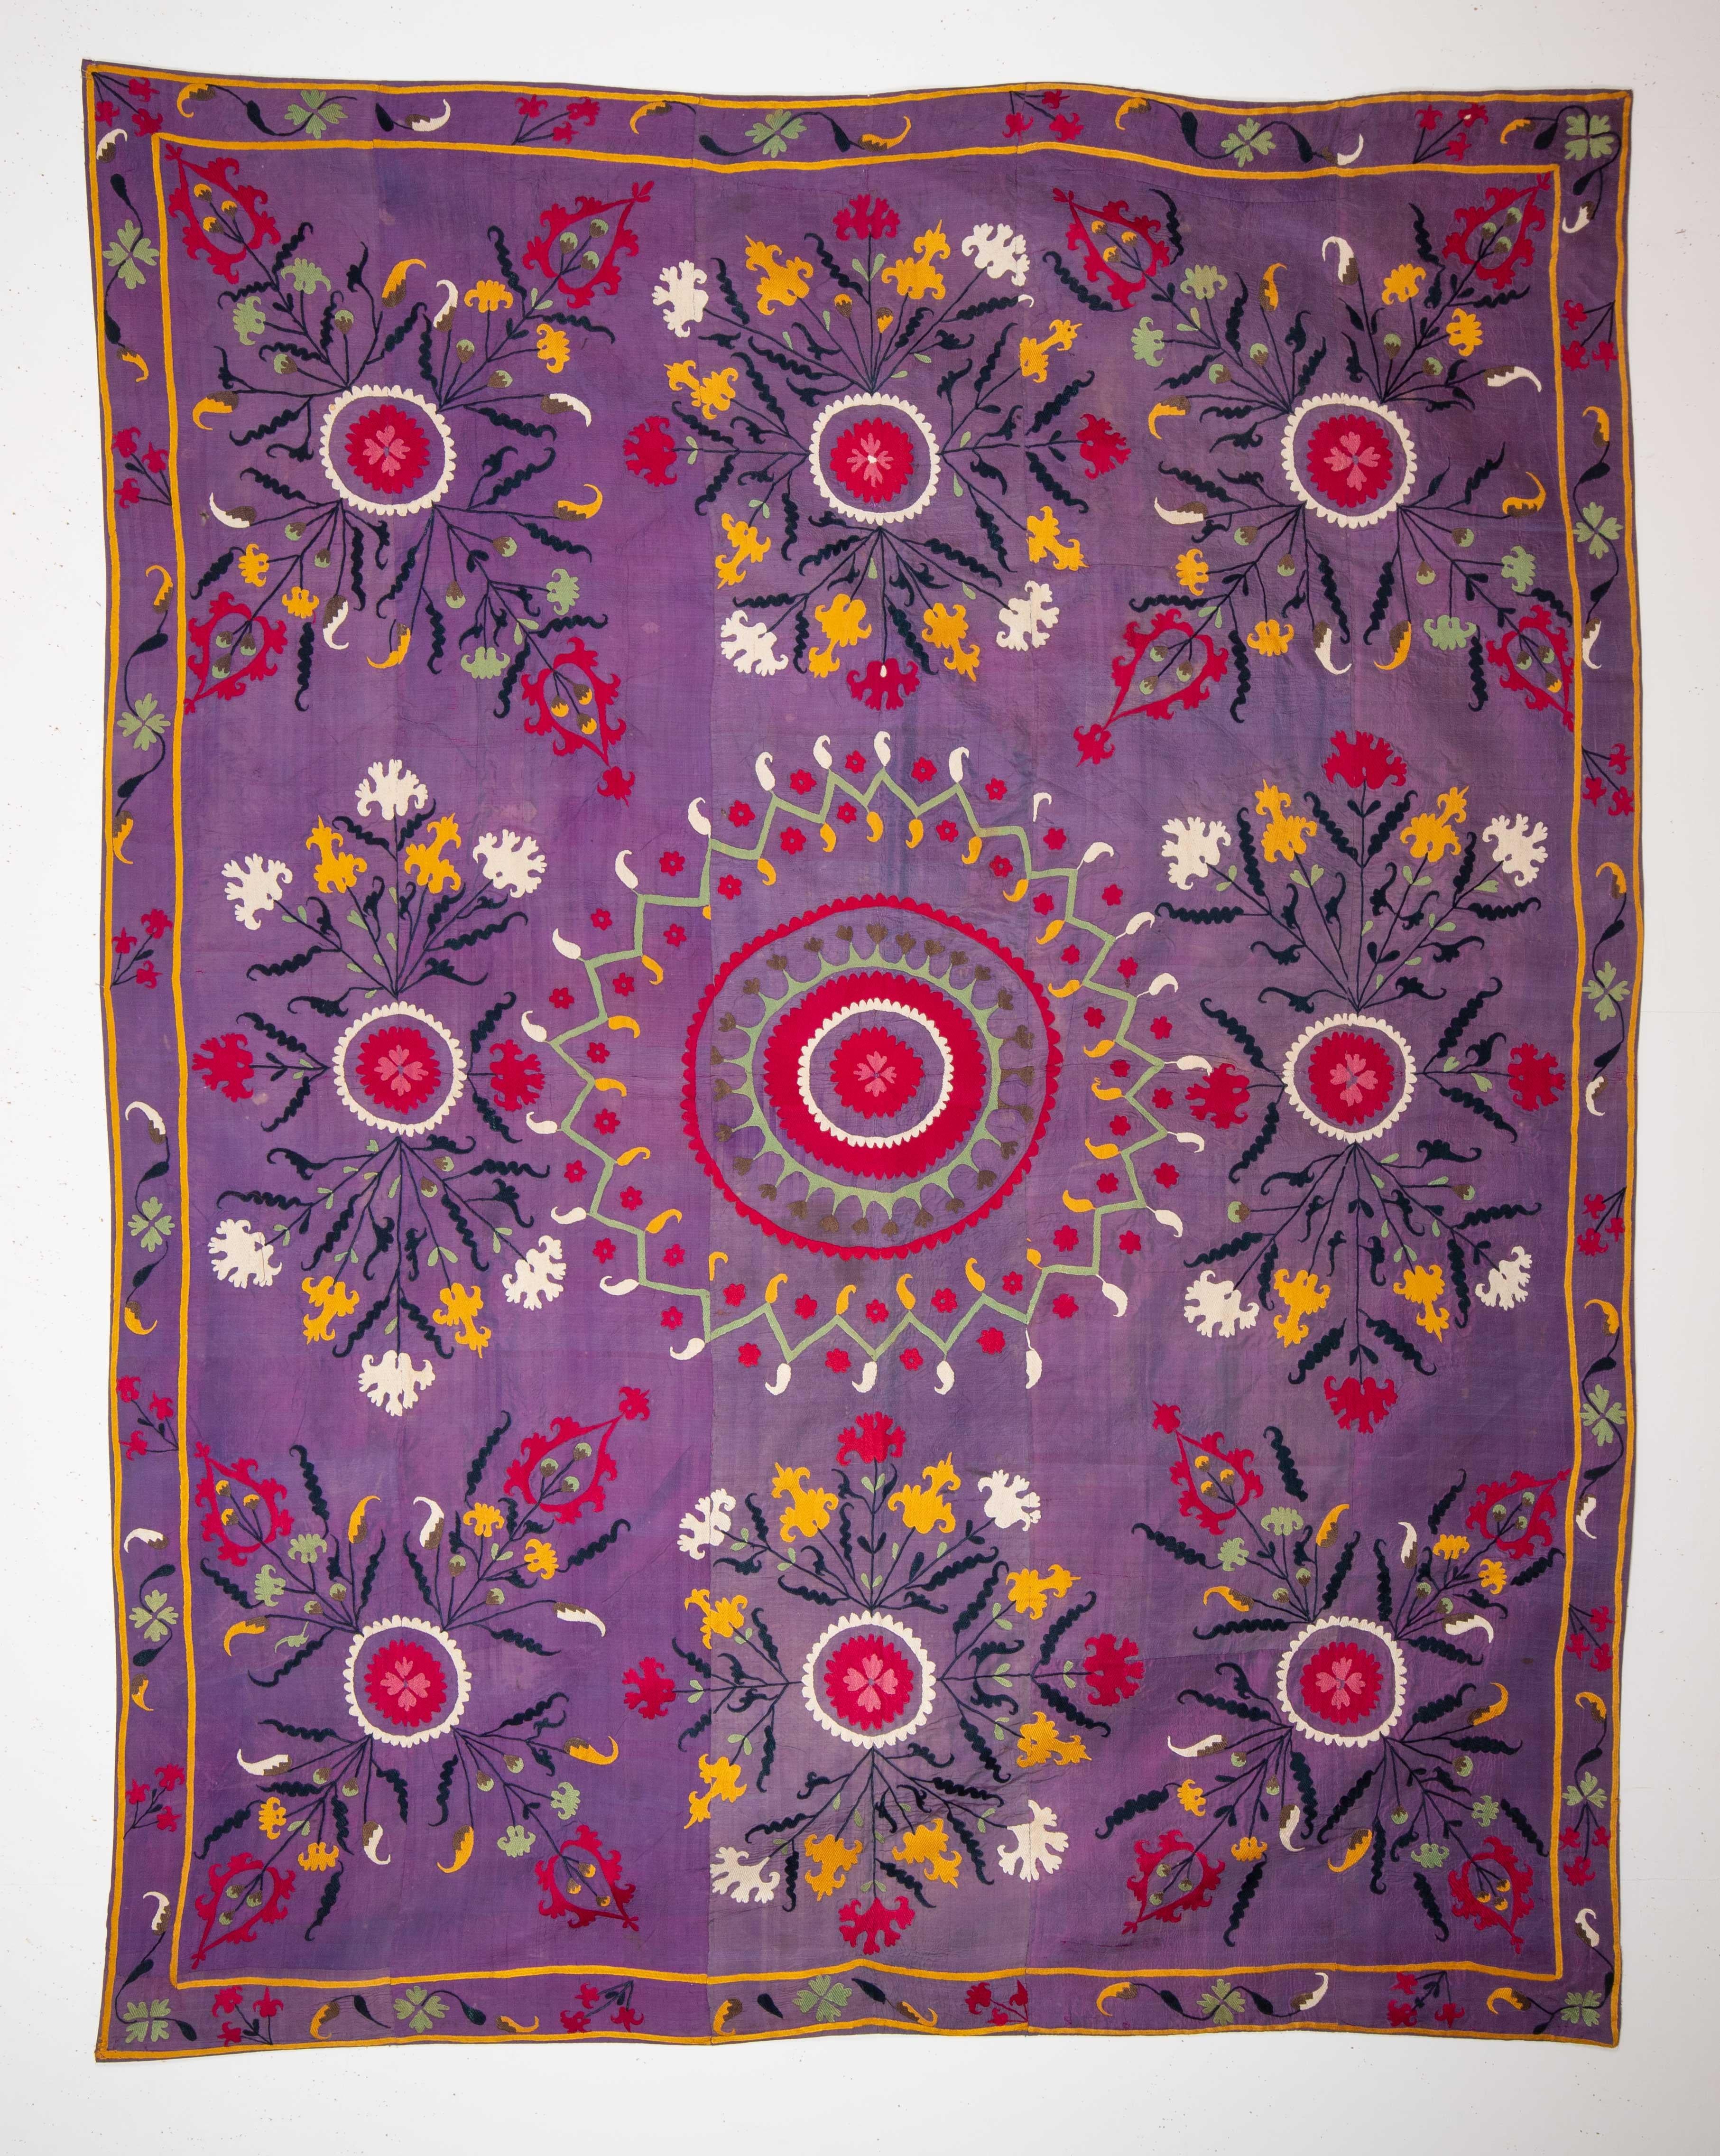 This suzani is embroidered on a silk background. It is an early 20th c example of probably Ferghana Valley suzanis in Uzbekistan.
